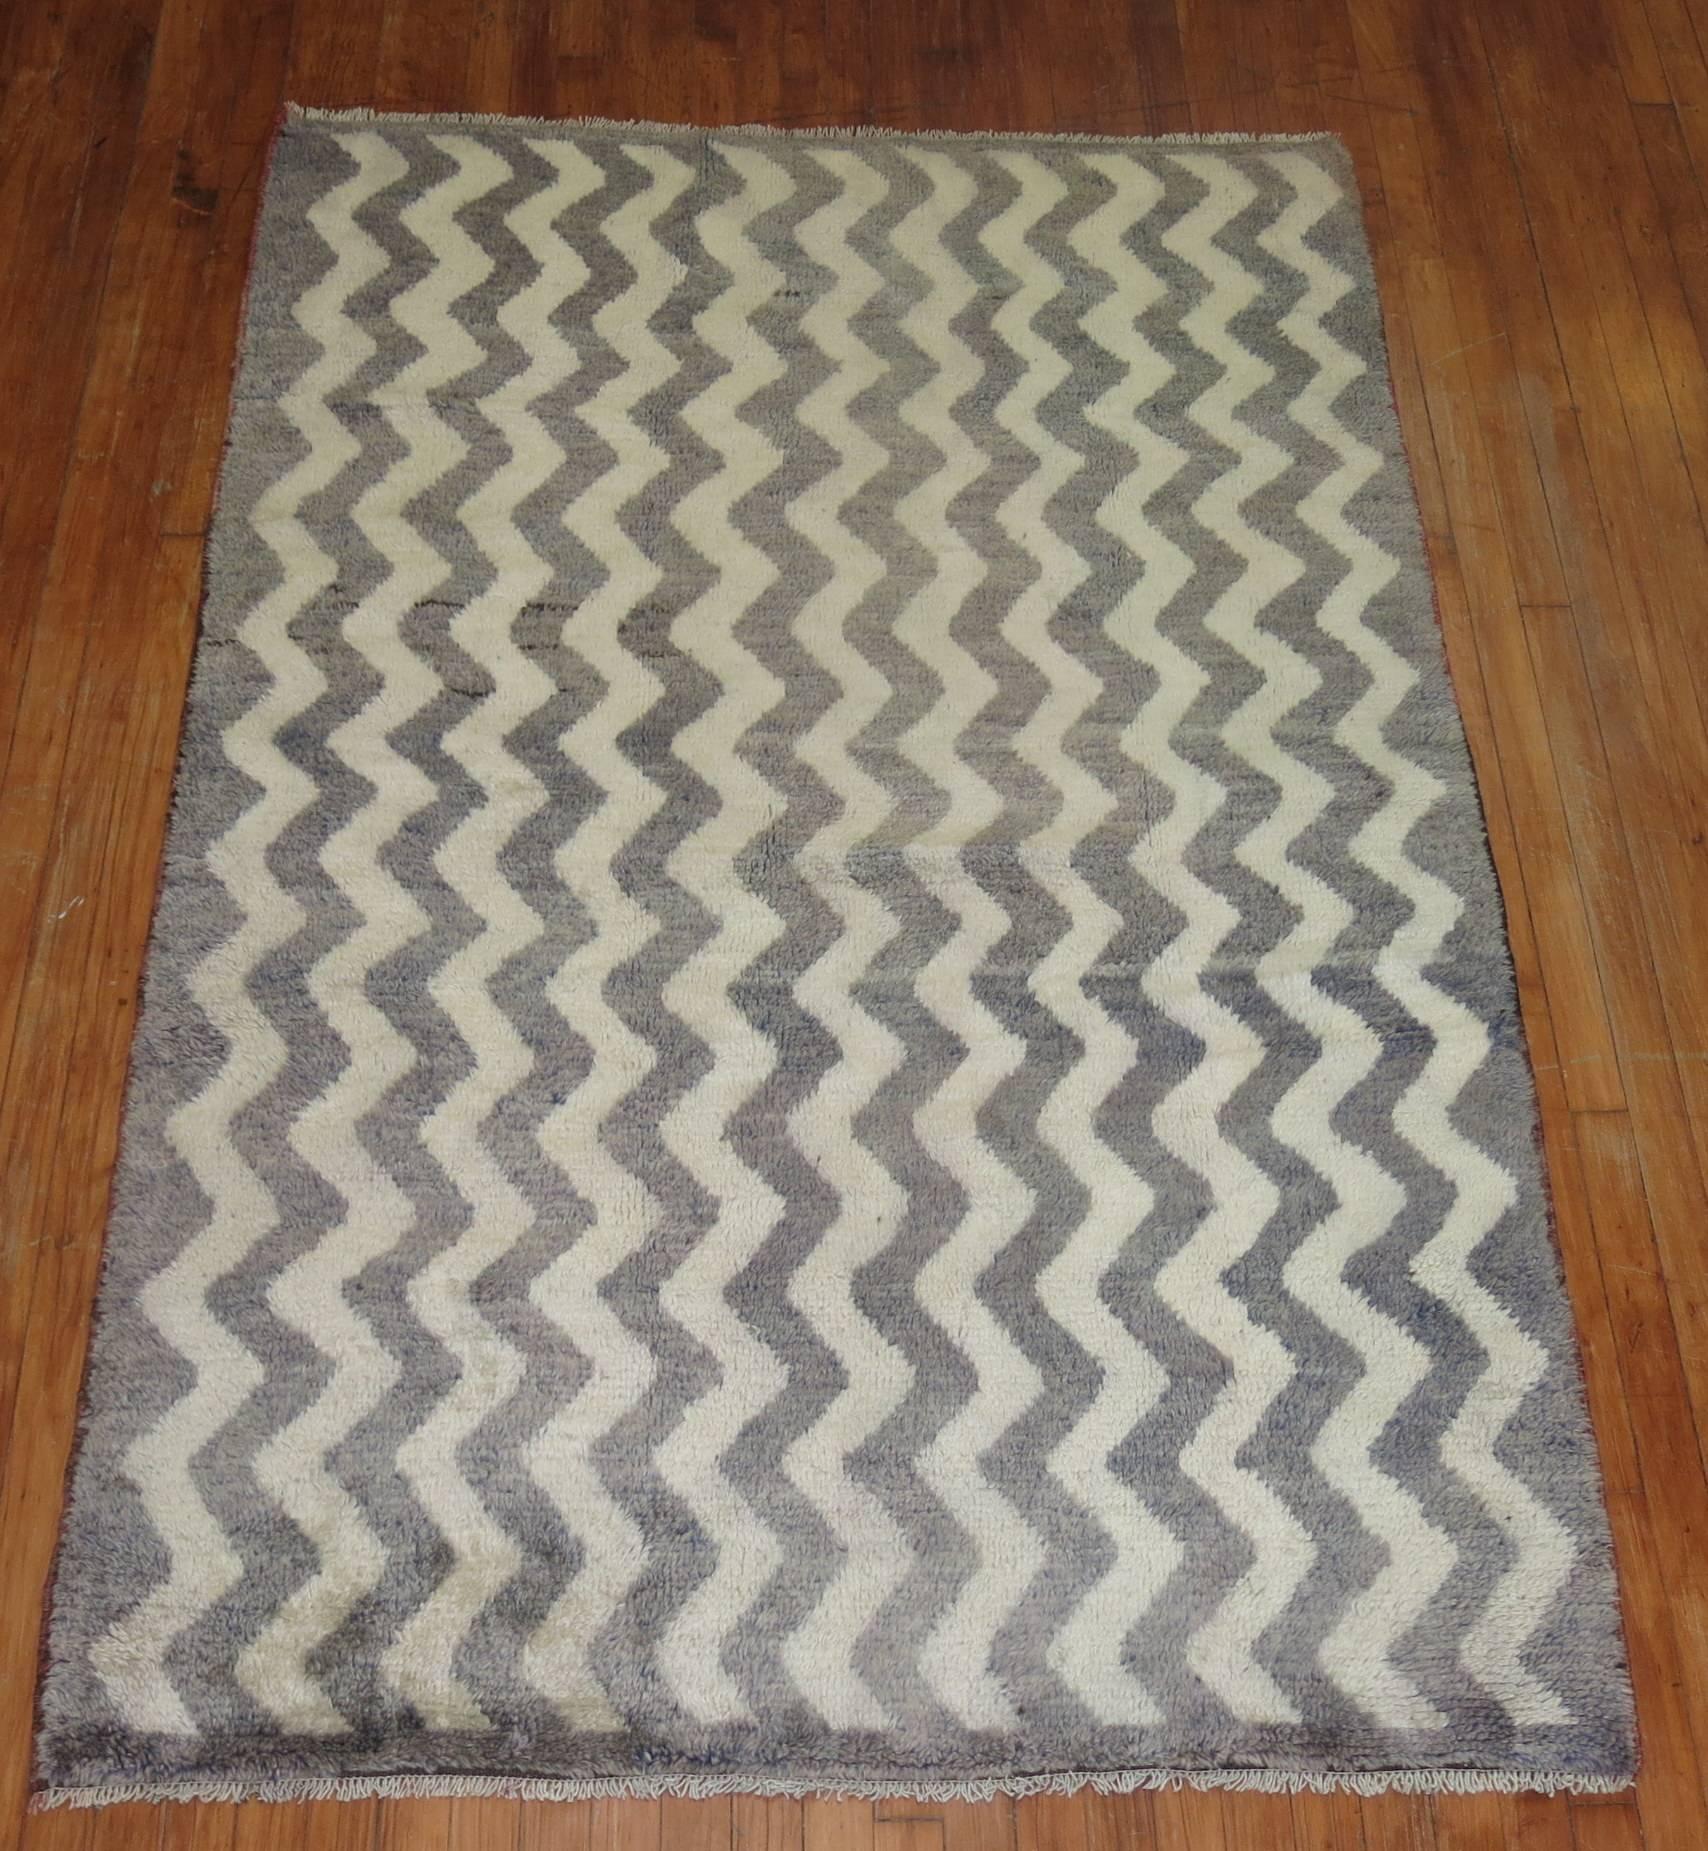 Turkish Tulu rug in grey and ivory with chevron design.

4'6'' x 6'10''